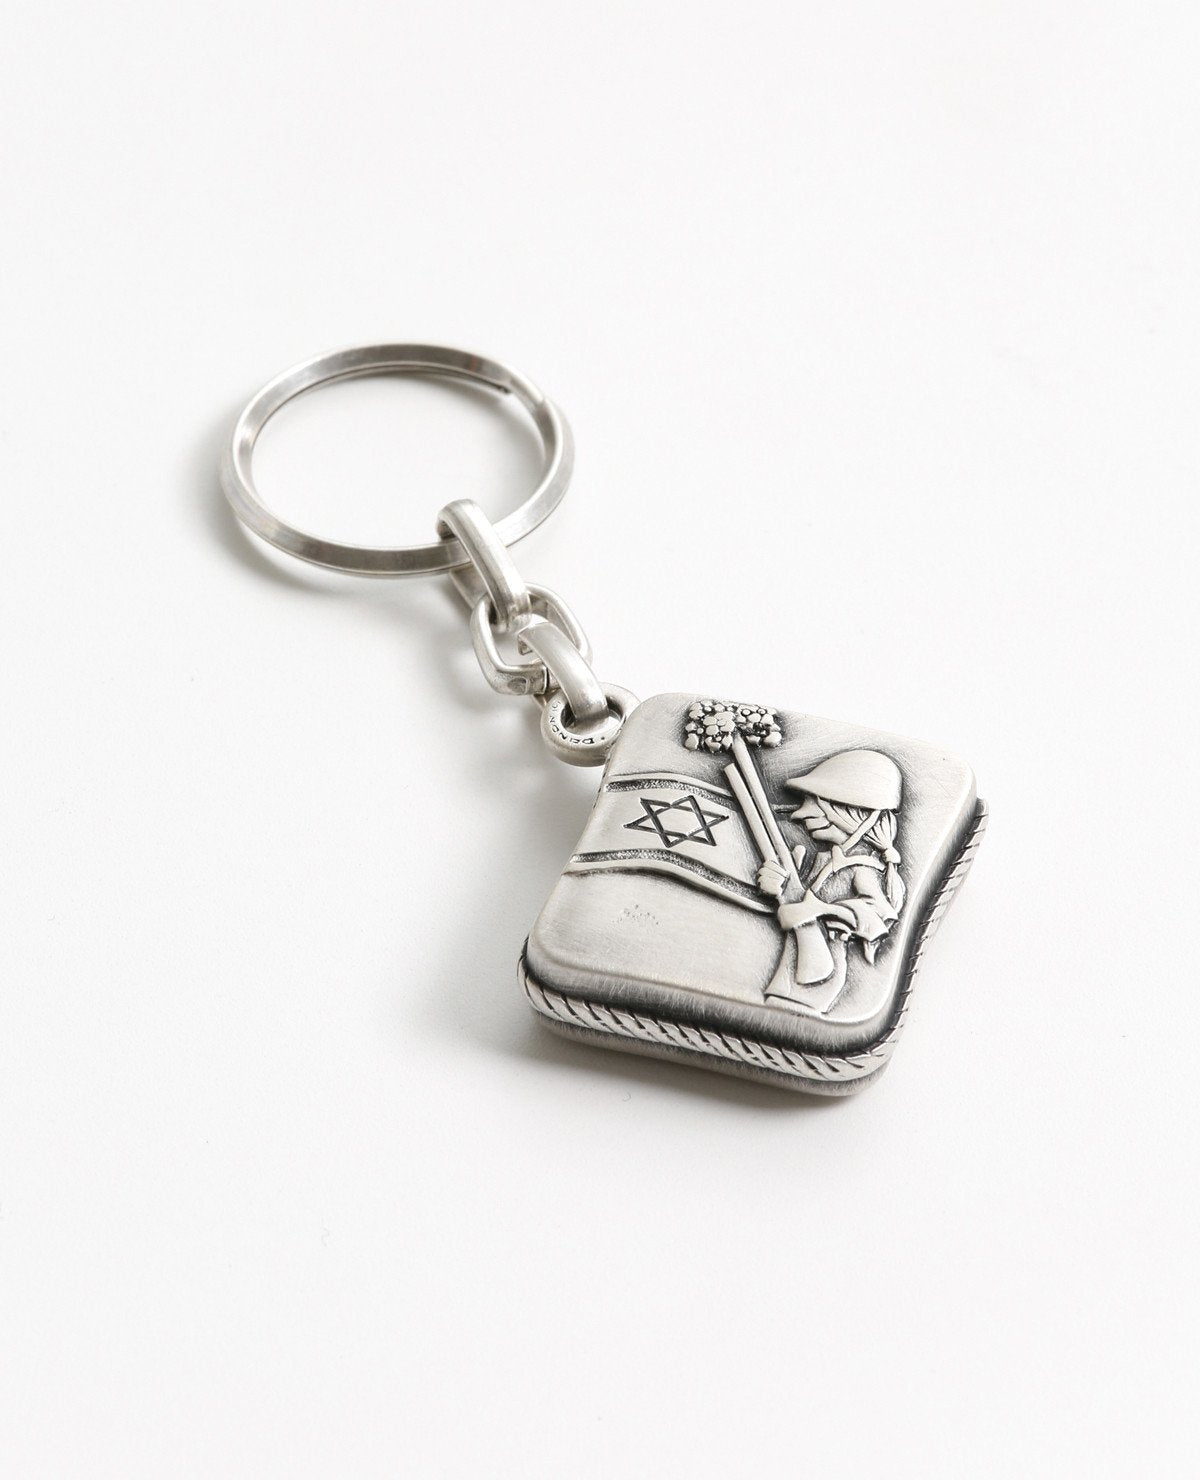 All the love, worry, values and protection in one place. The keychain is designed in the shape of a box, within it a small book of Tehillim for the way. Embossed on one side of the keychain is a hollow Hamsa, which the book can be seen through, and the words "protect my soldier" engraved at its base. On the other side is an embossed caricature of a female soldier on guard next to a flag of Israel. The keychain is coated in sterling silver and is strong and reliable. Make sure it is always in your soldier's 